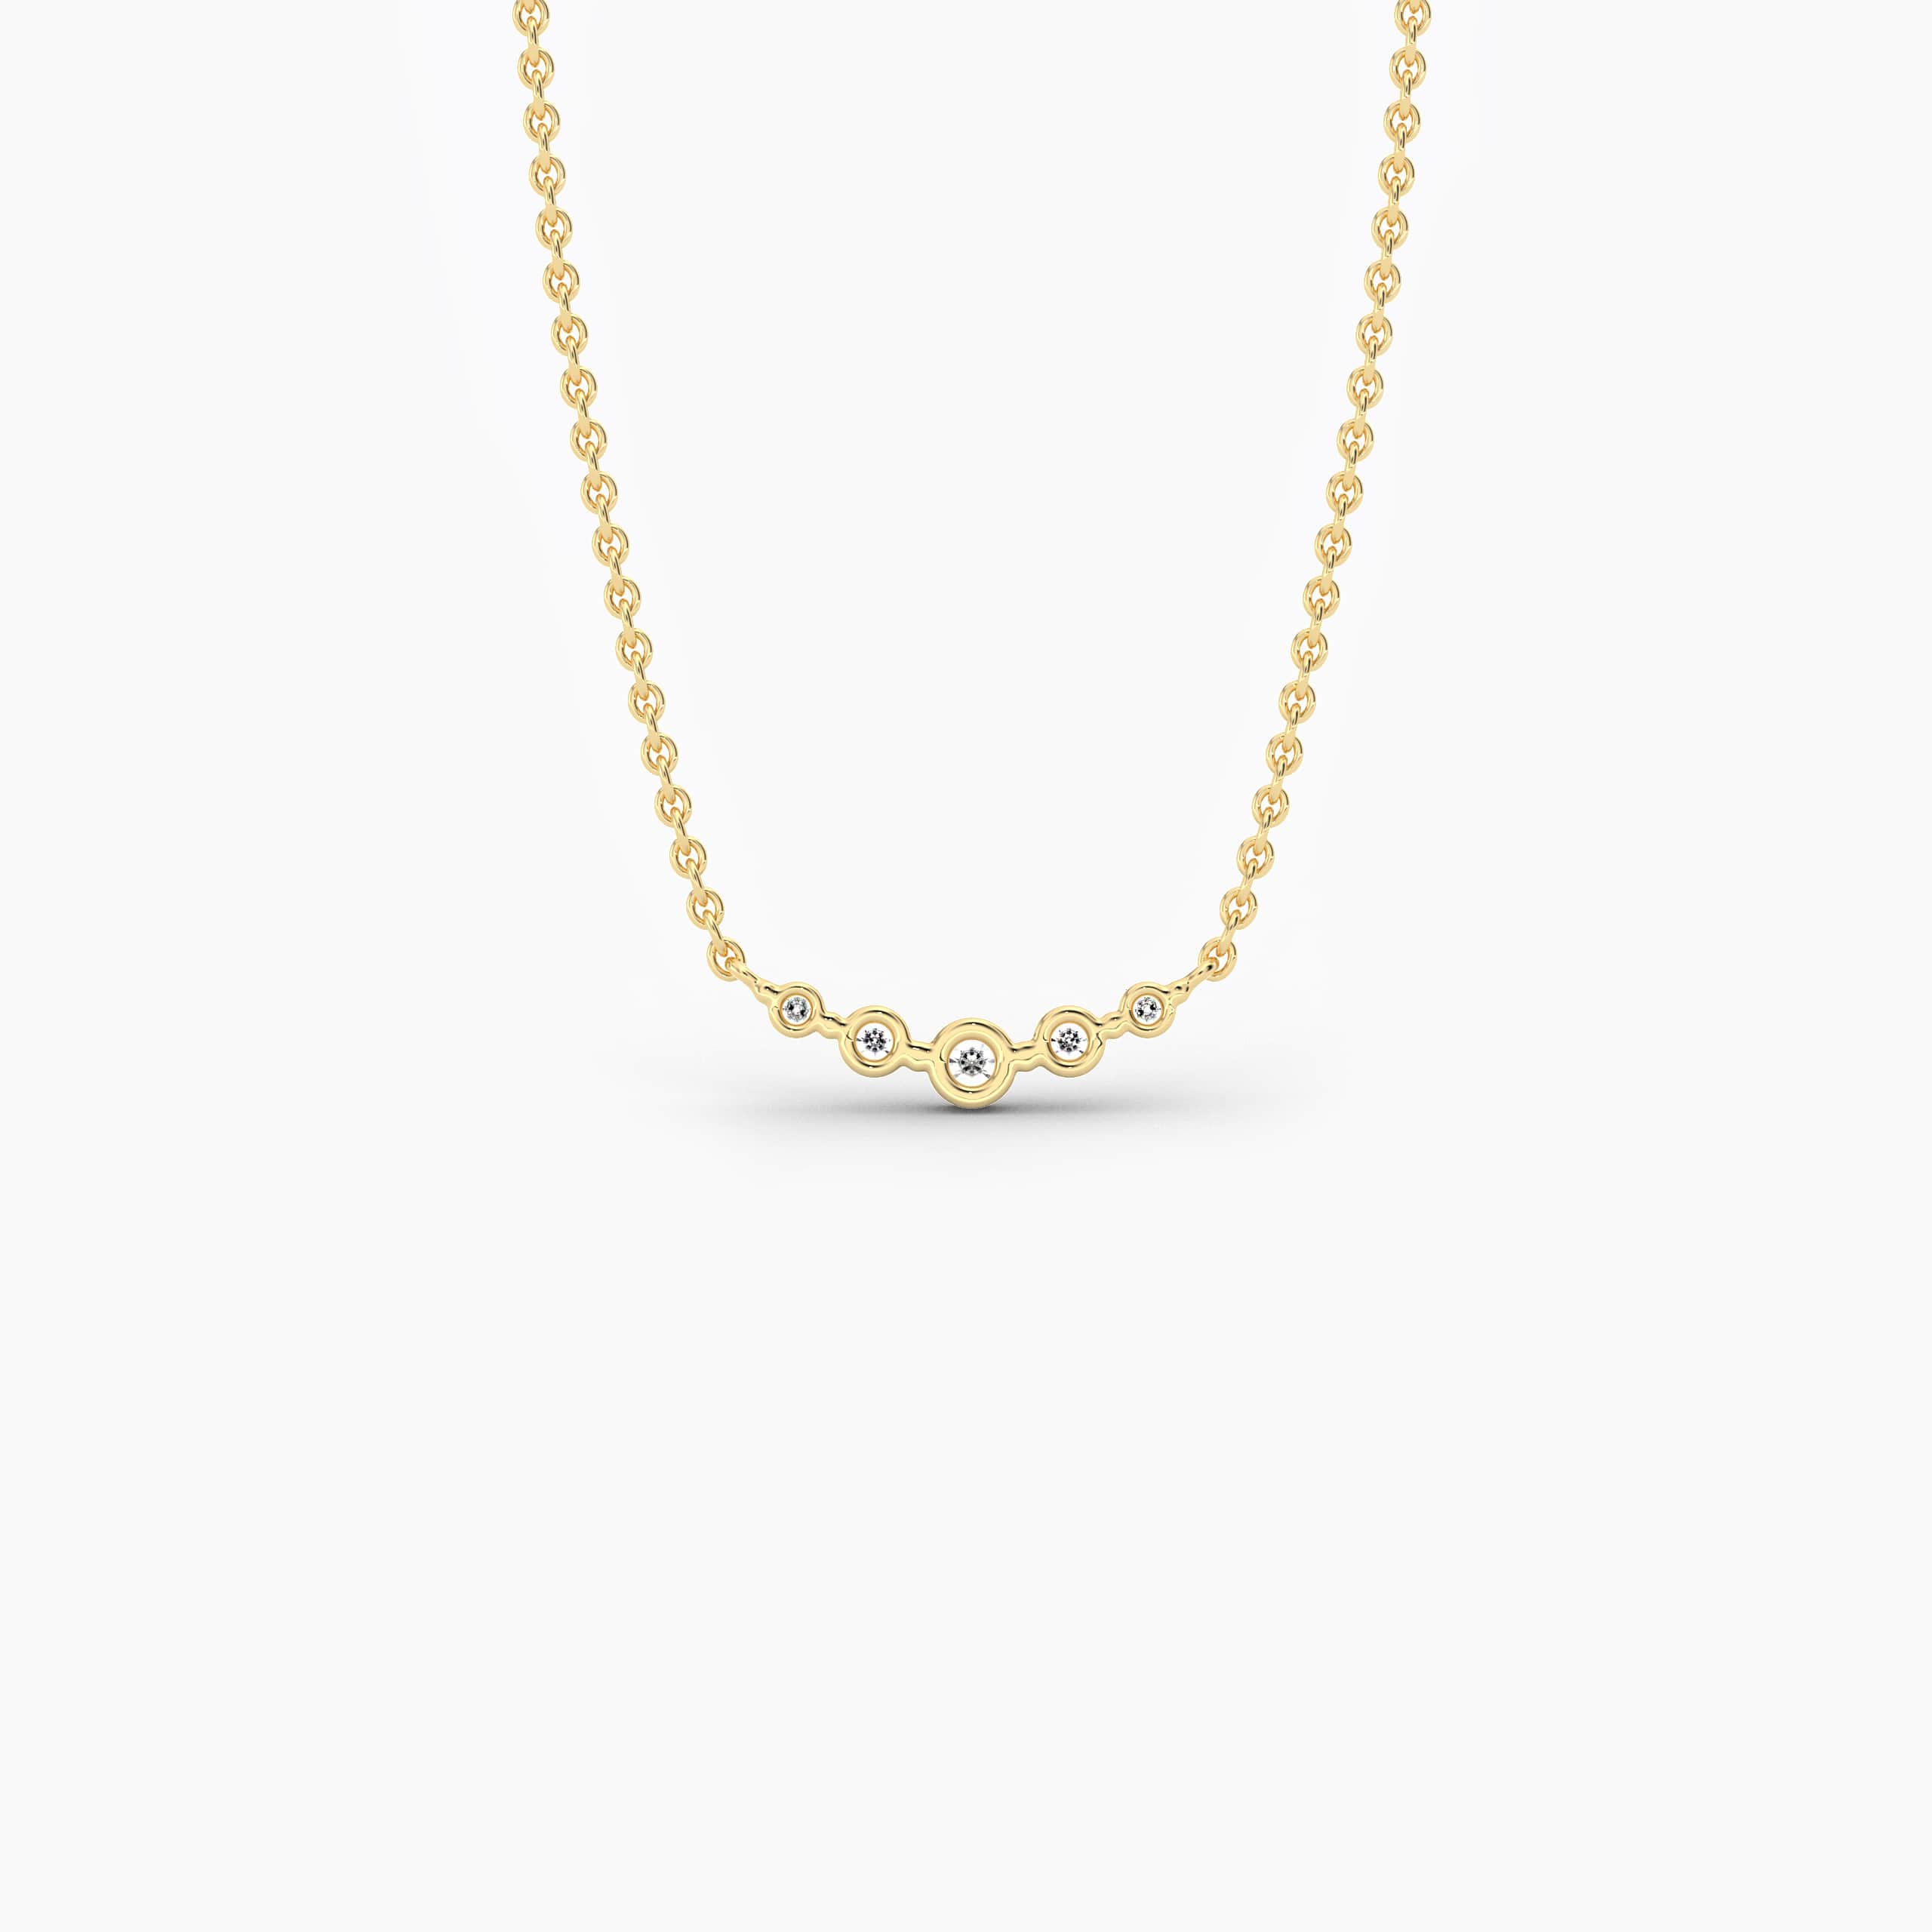 5 Stones Round Cut Diamond Necklaces  For Woman In Yellow Gold 